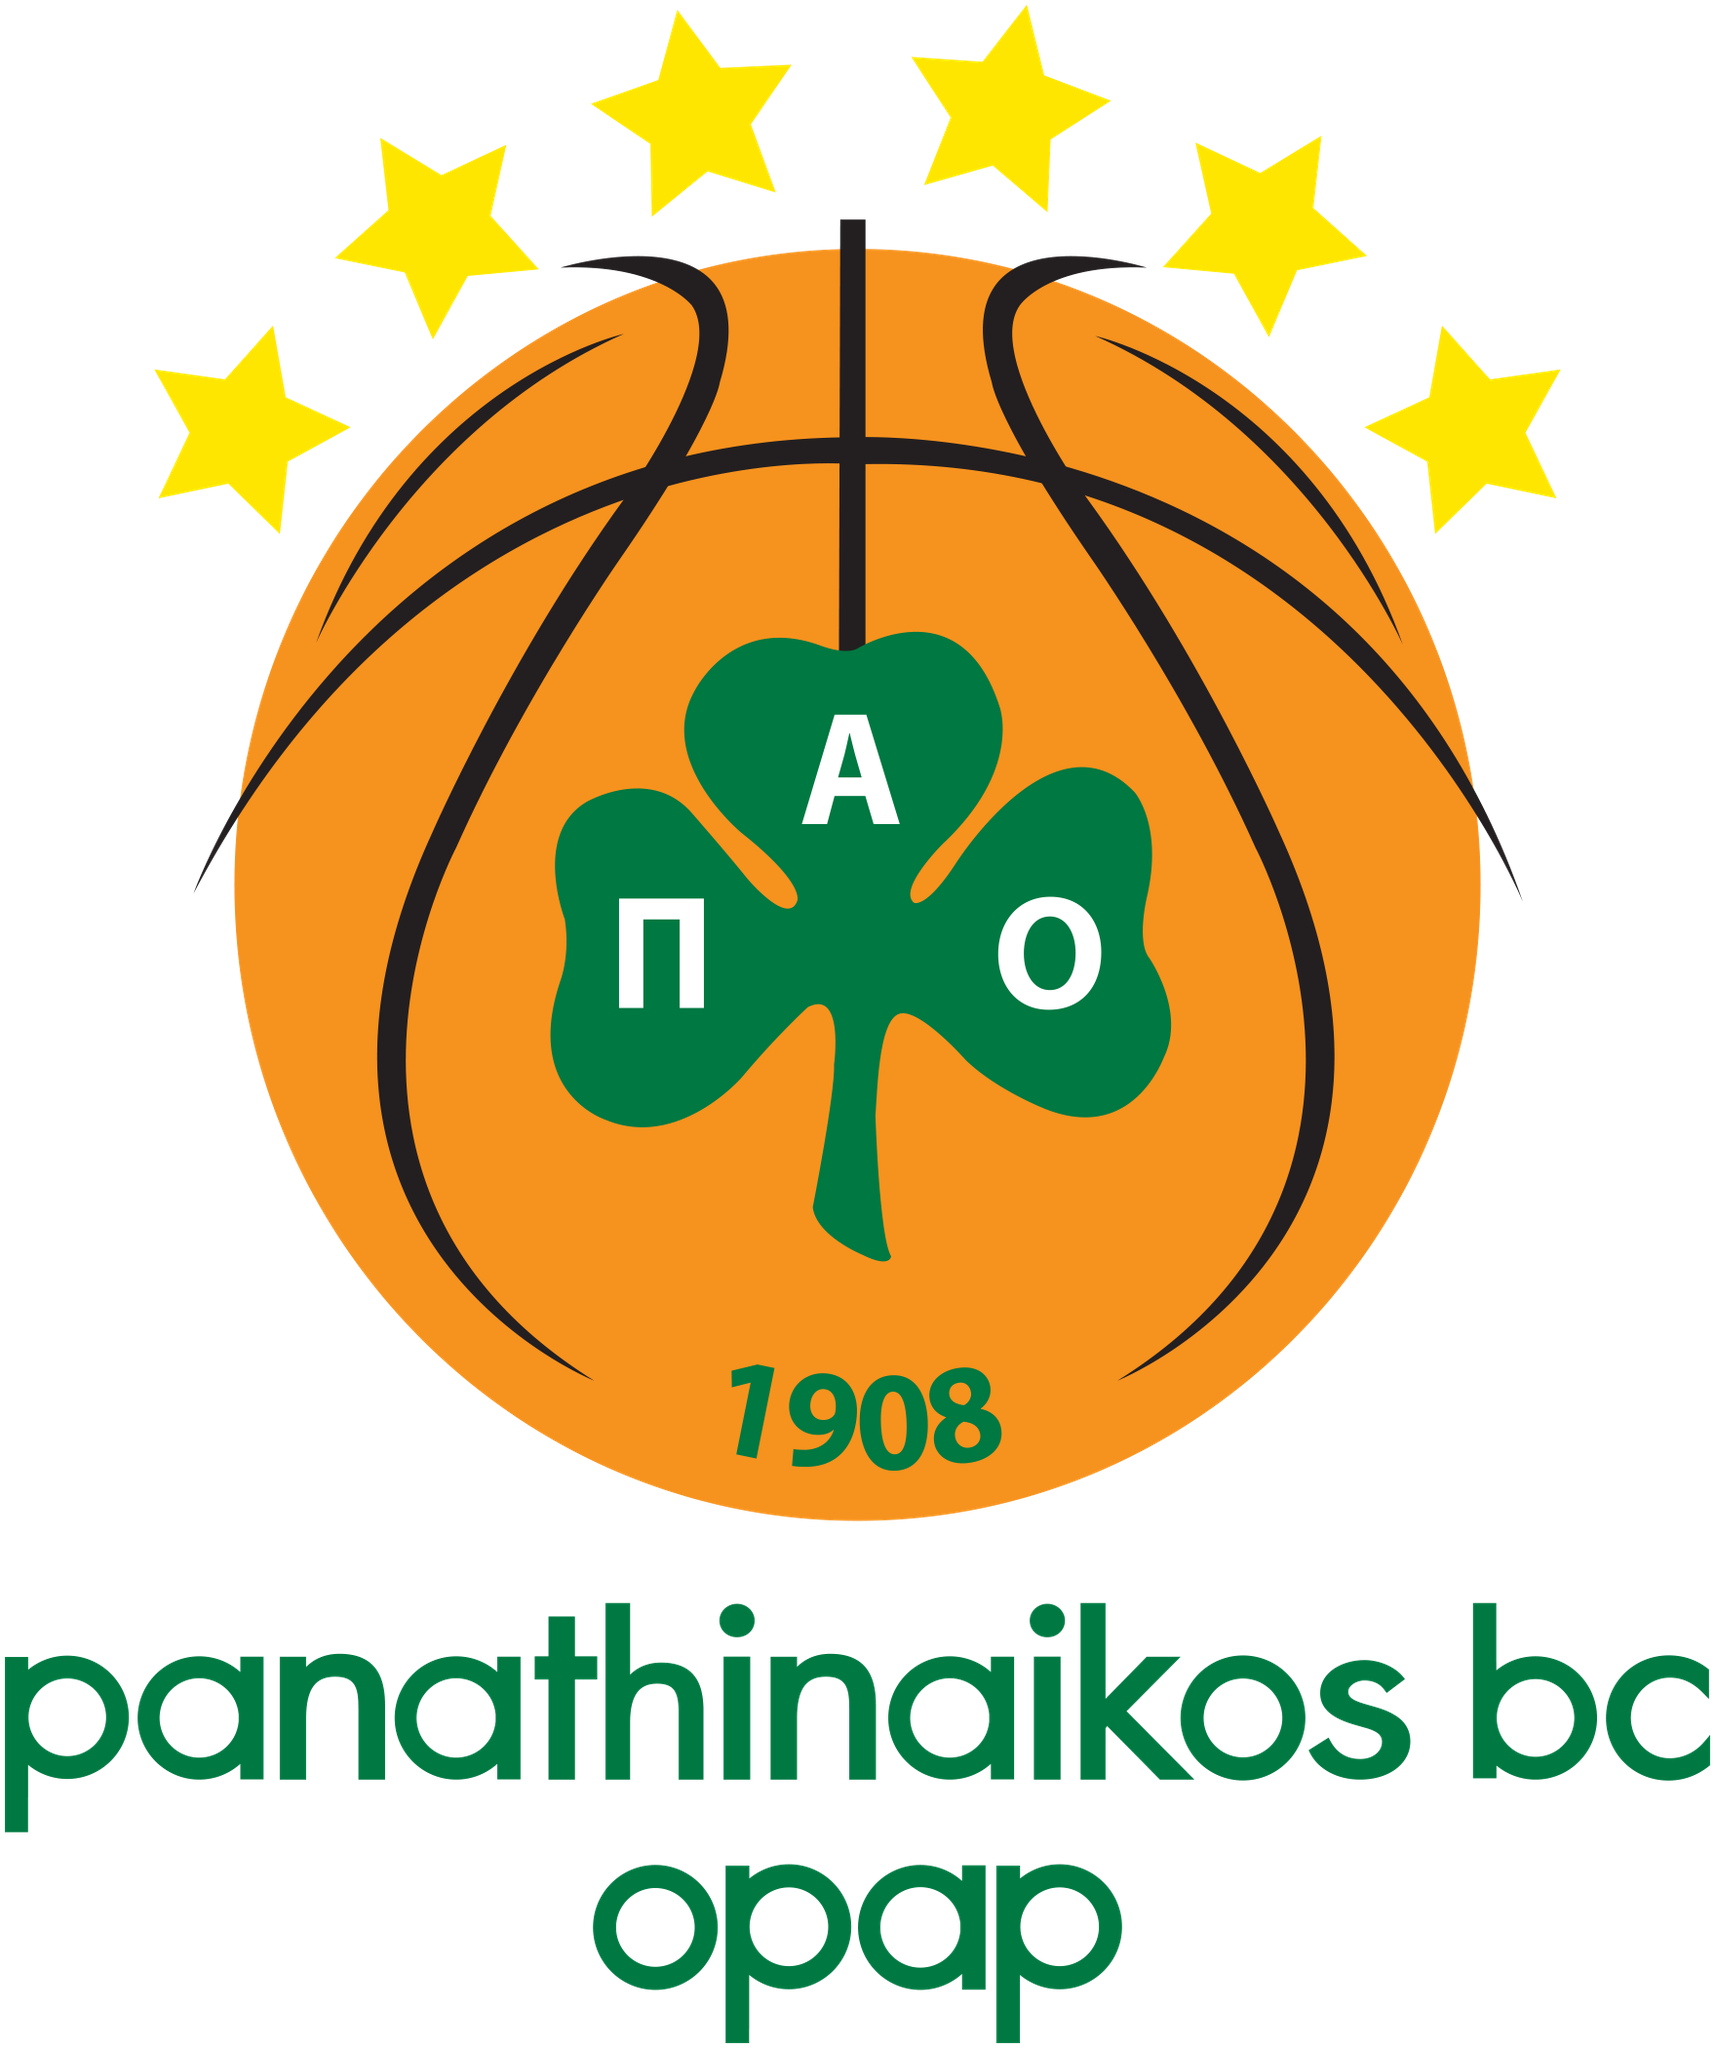 Team symbol of ΠΑΝΑΘΗΝΑΙΚΟΣ ΑΟ ΚΑΕ